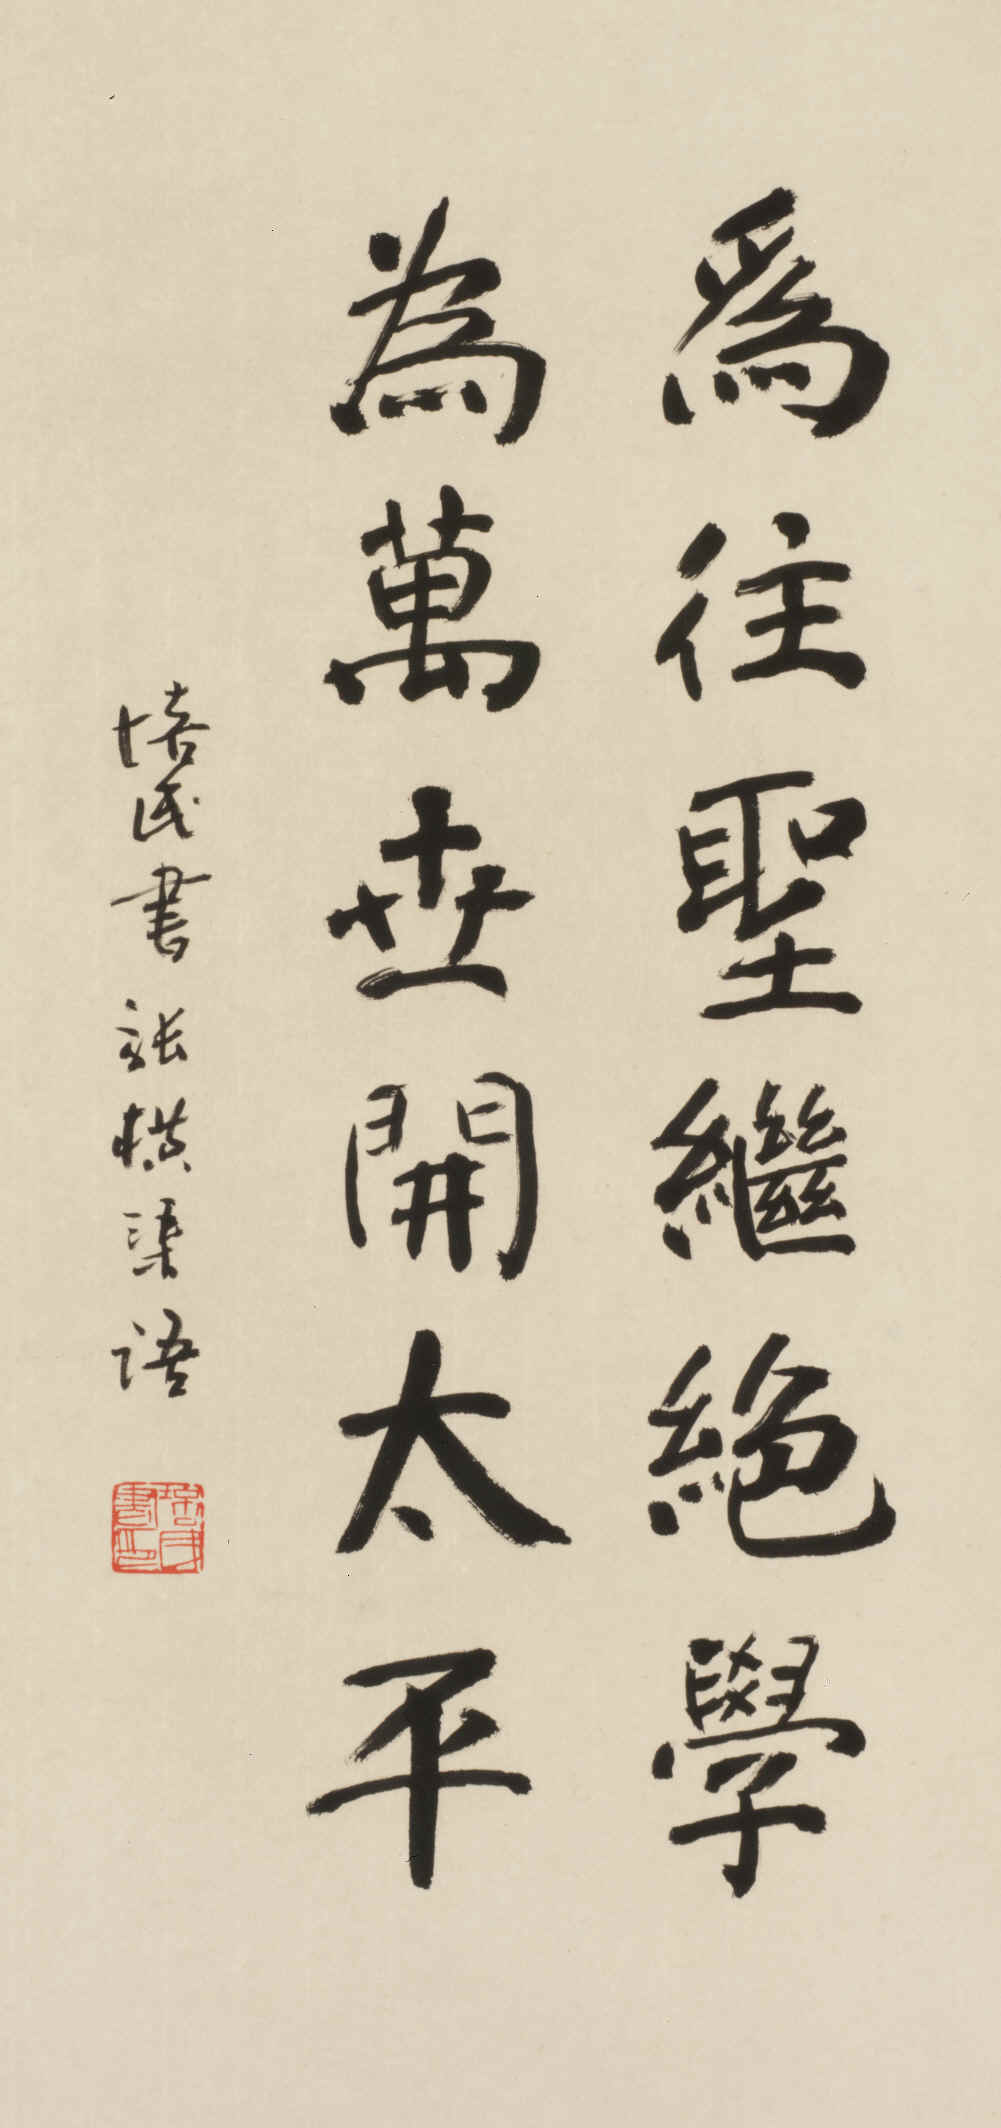 dao companion to the philosophy of the zhuangzi